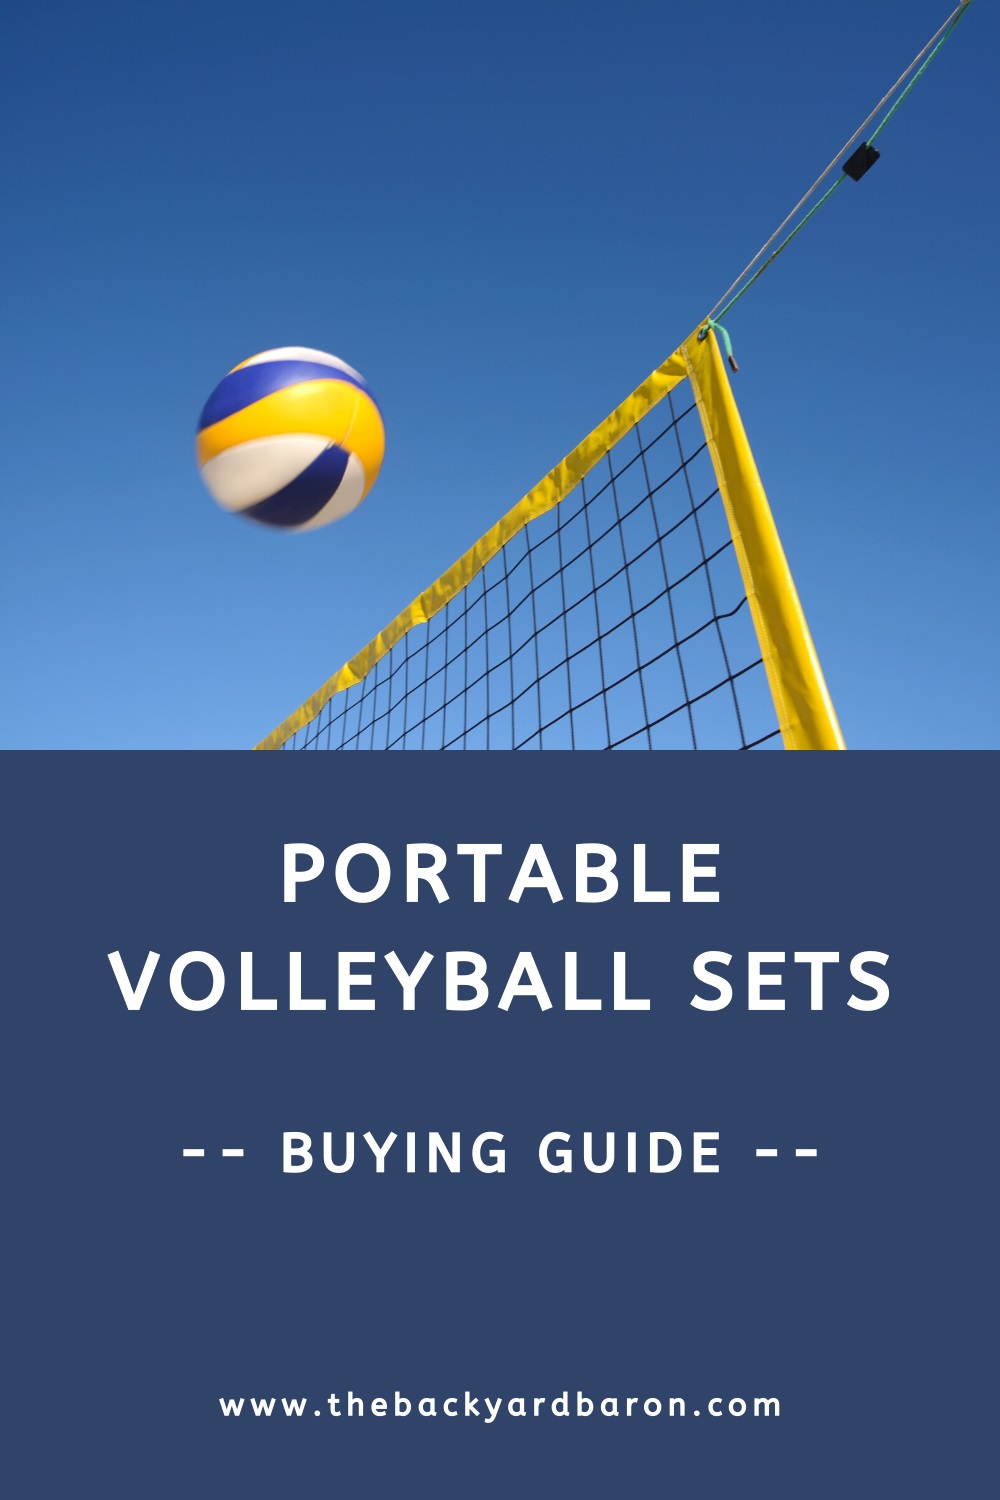 Portable backyard volleyball set buying guide